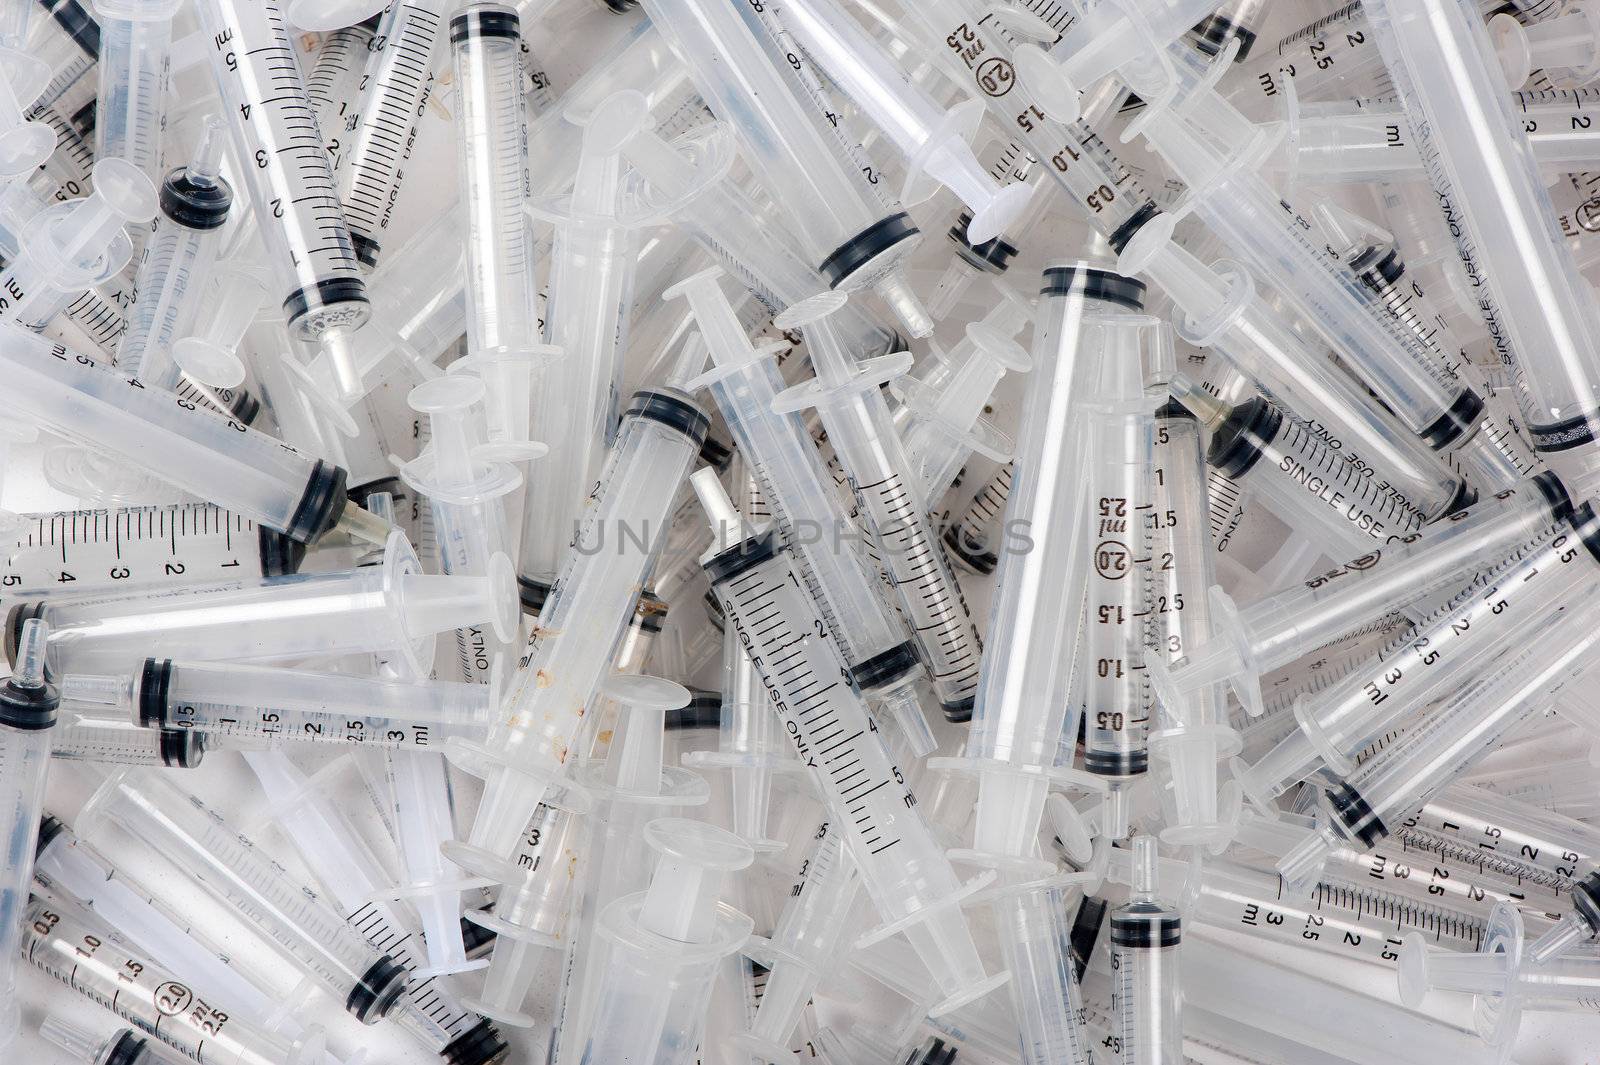 Used syringes by Zafi123